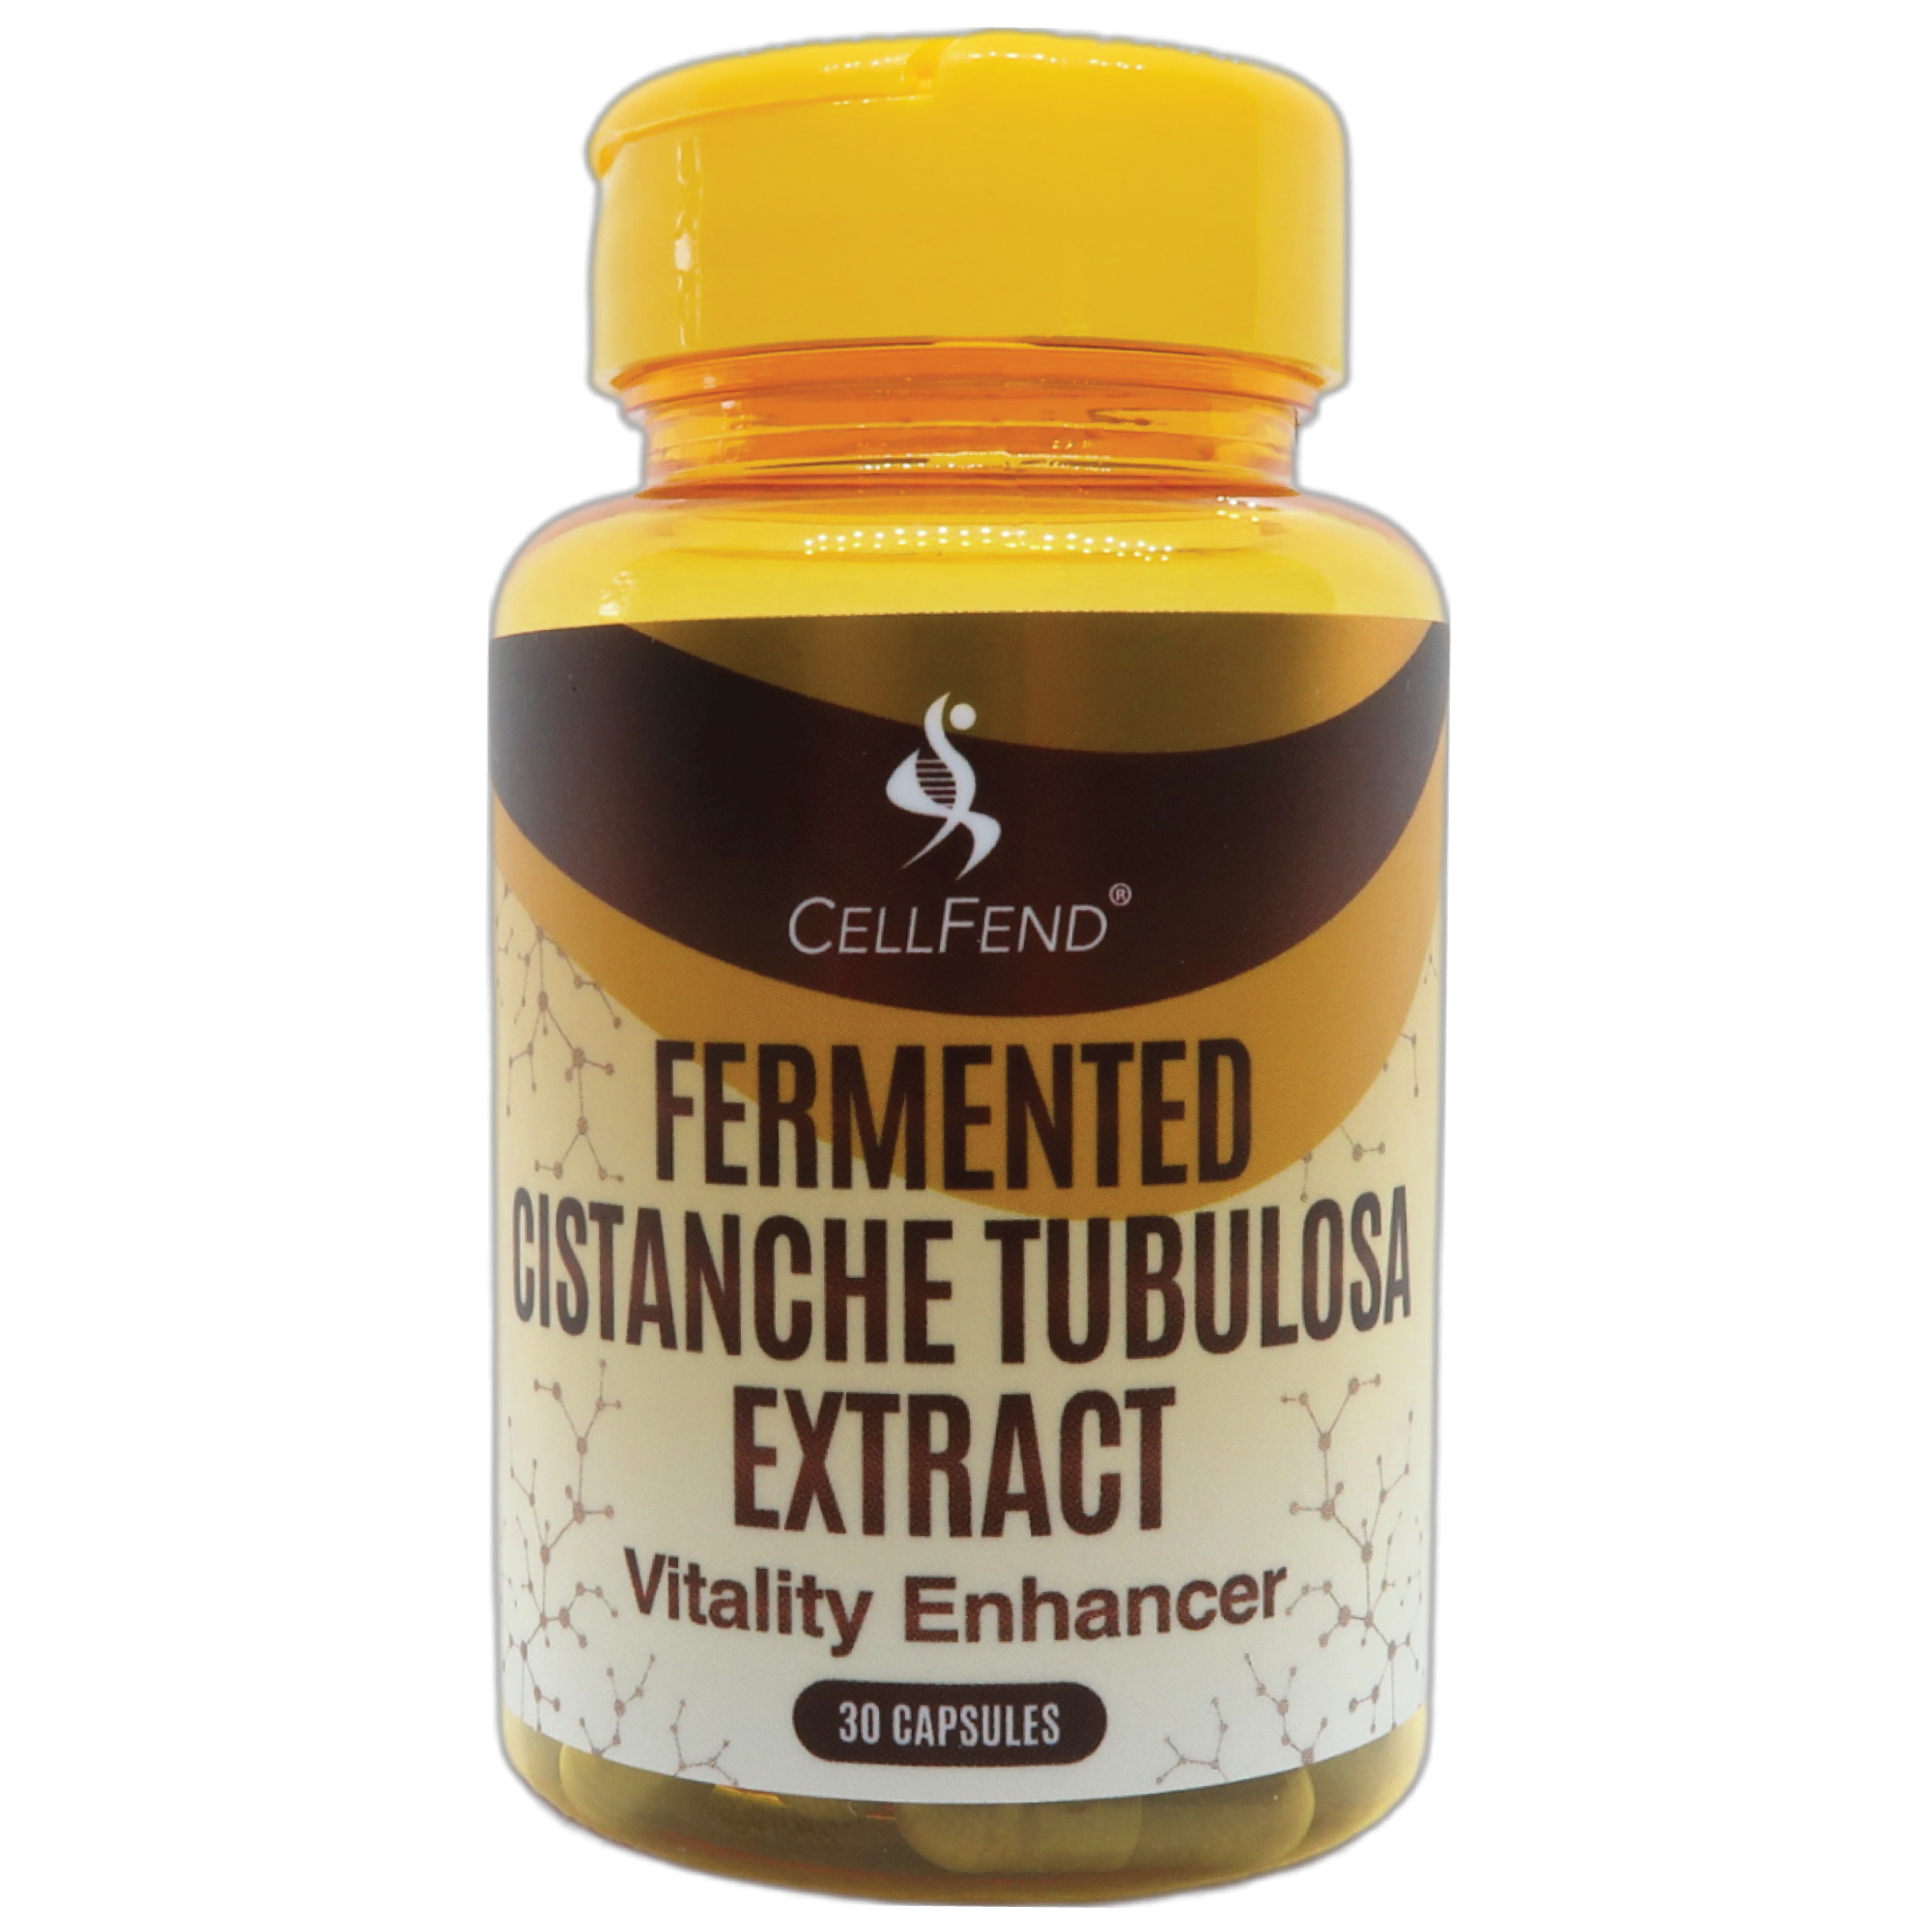 Fermented Cistanche Tubulosa Extract